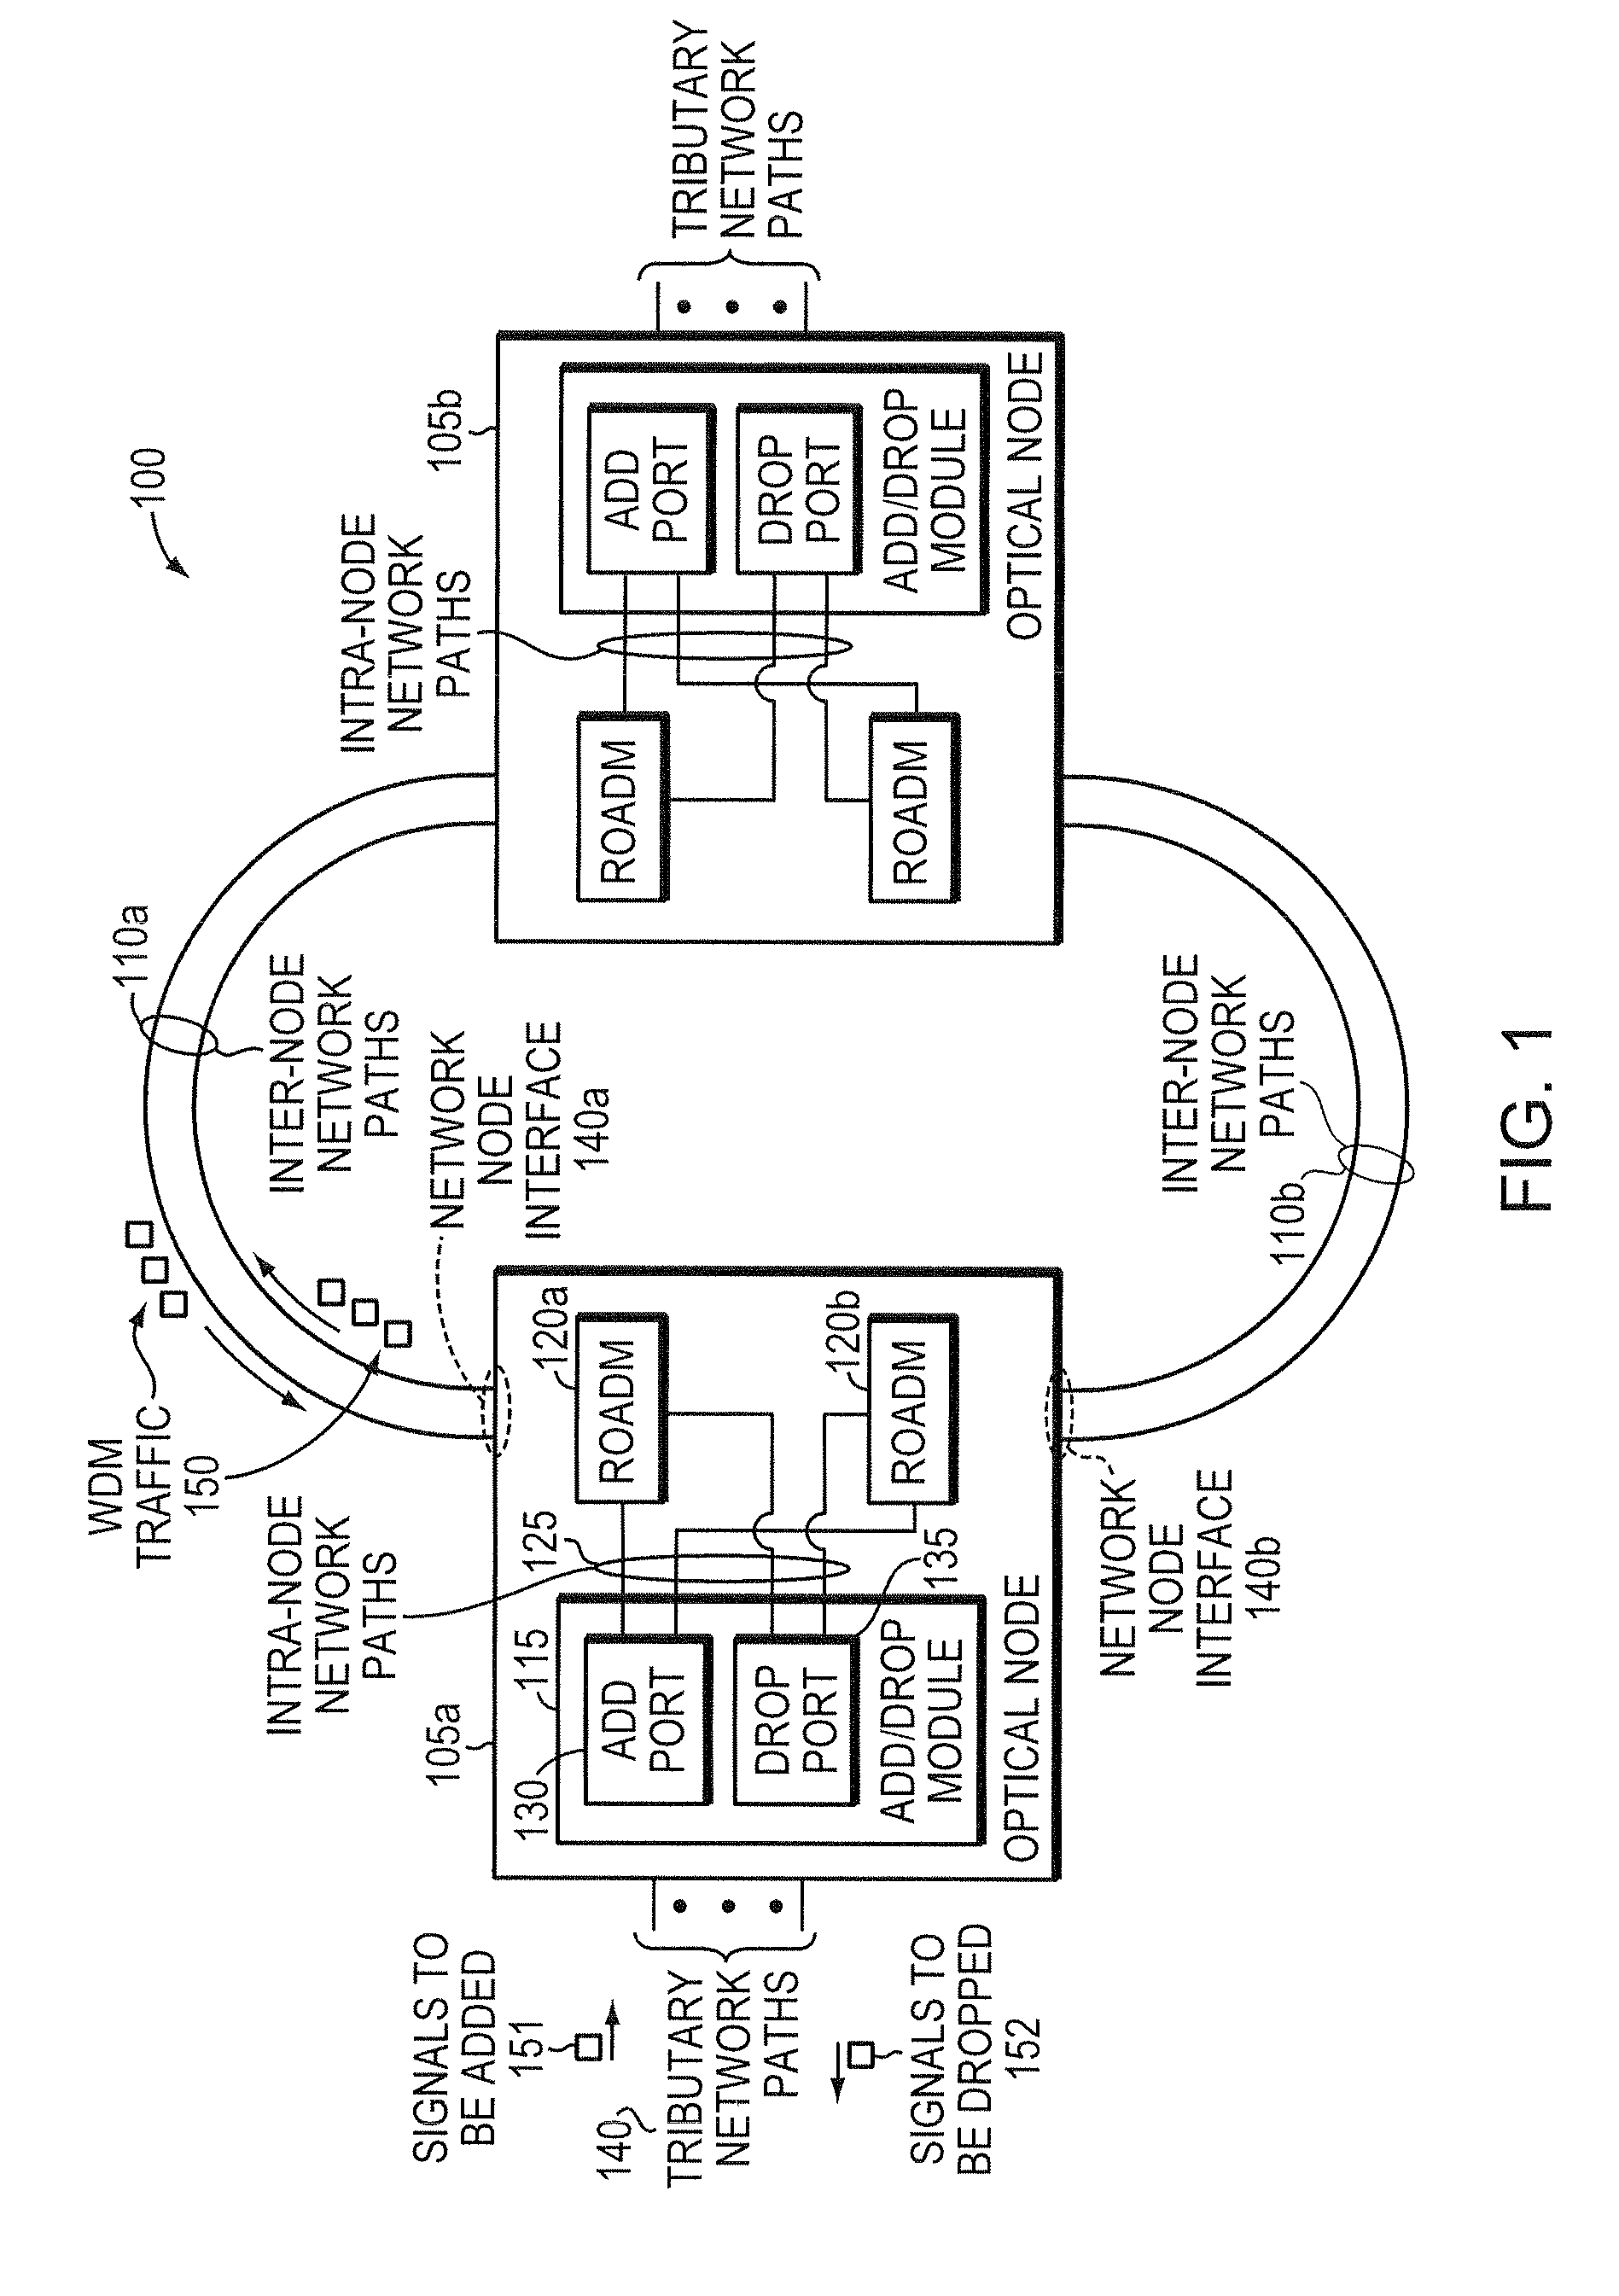 Methods and apparatus for performing directionless and contentionless wavelength addition and subtraction